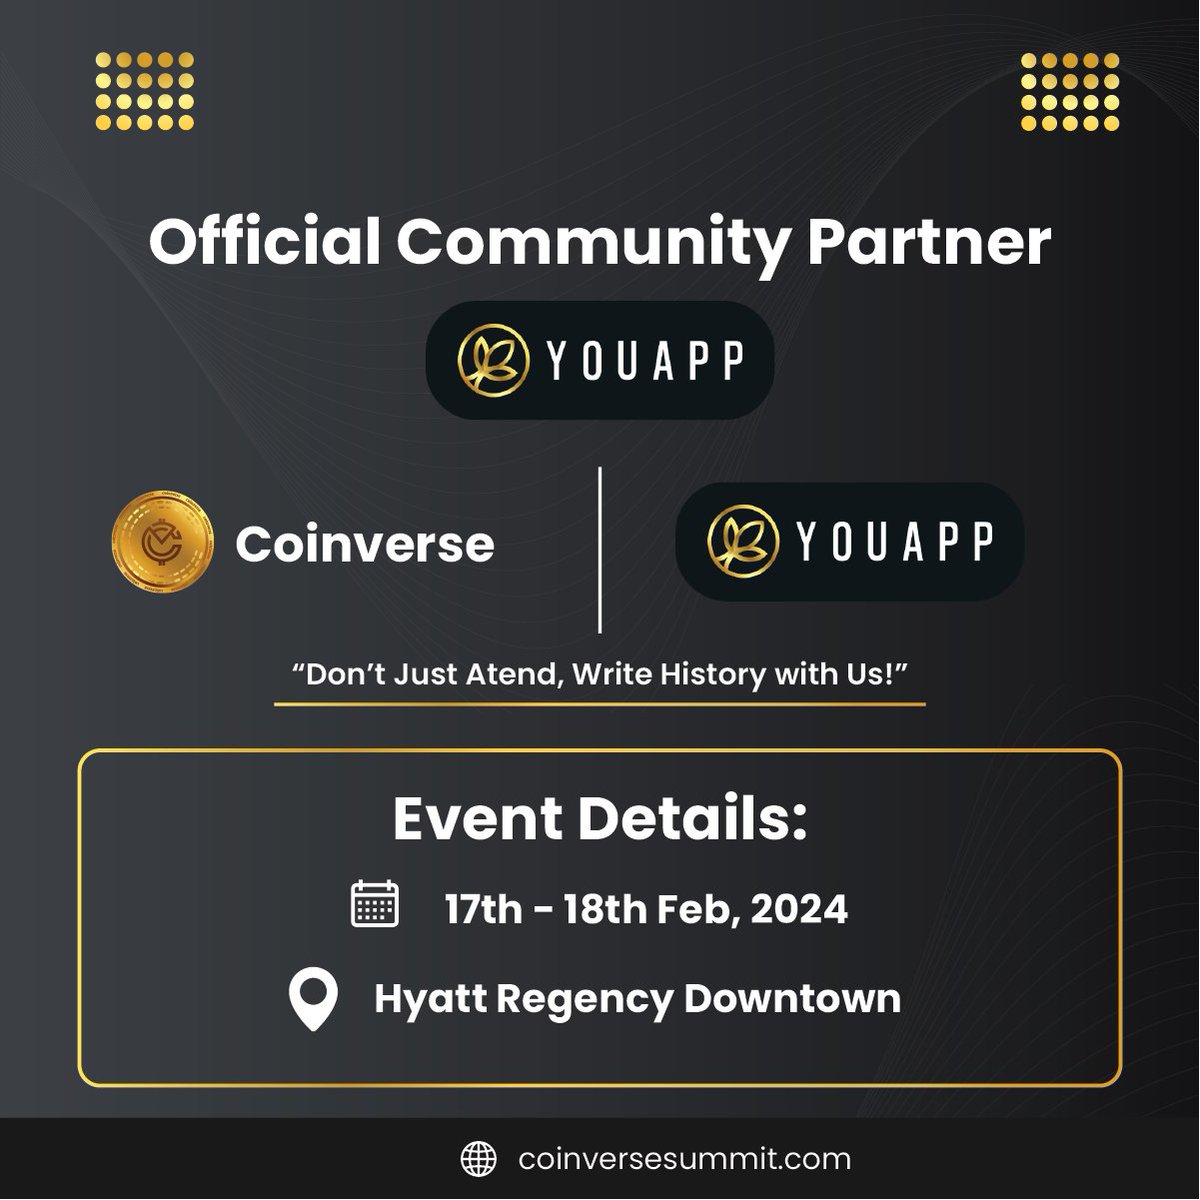 🌐 Exciting Partnership Alert! 🚀 Coinverse Summit Joins Forces with YOUAPP as Official Community Partner! 🎉

🎁 To celebrate, we're giving away Coinverse Summit Passes to 2 lucky winners! Follow the steps below to participate:

Part 1